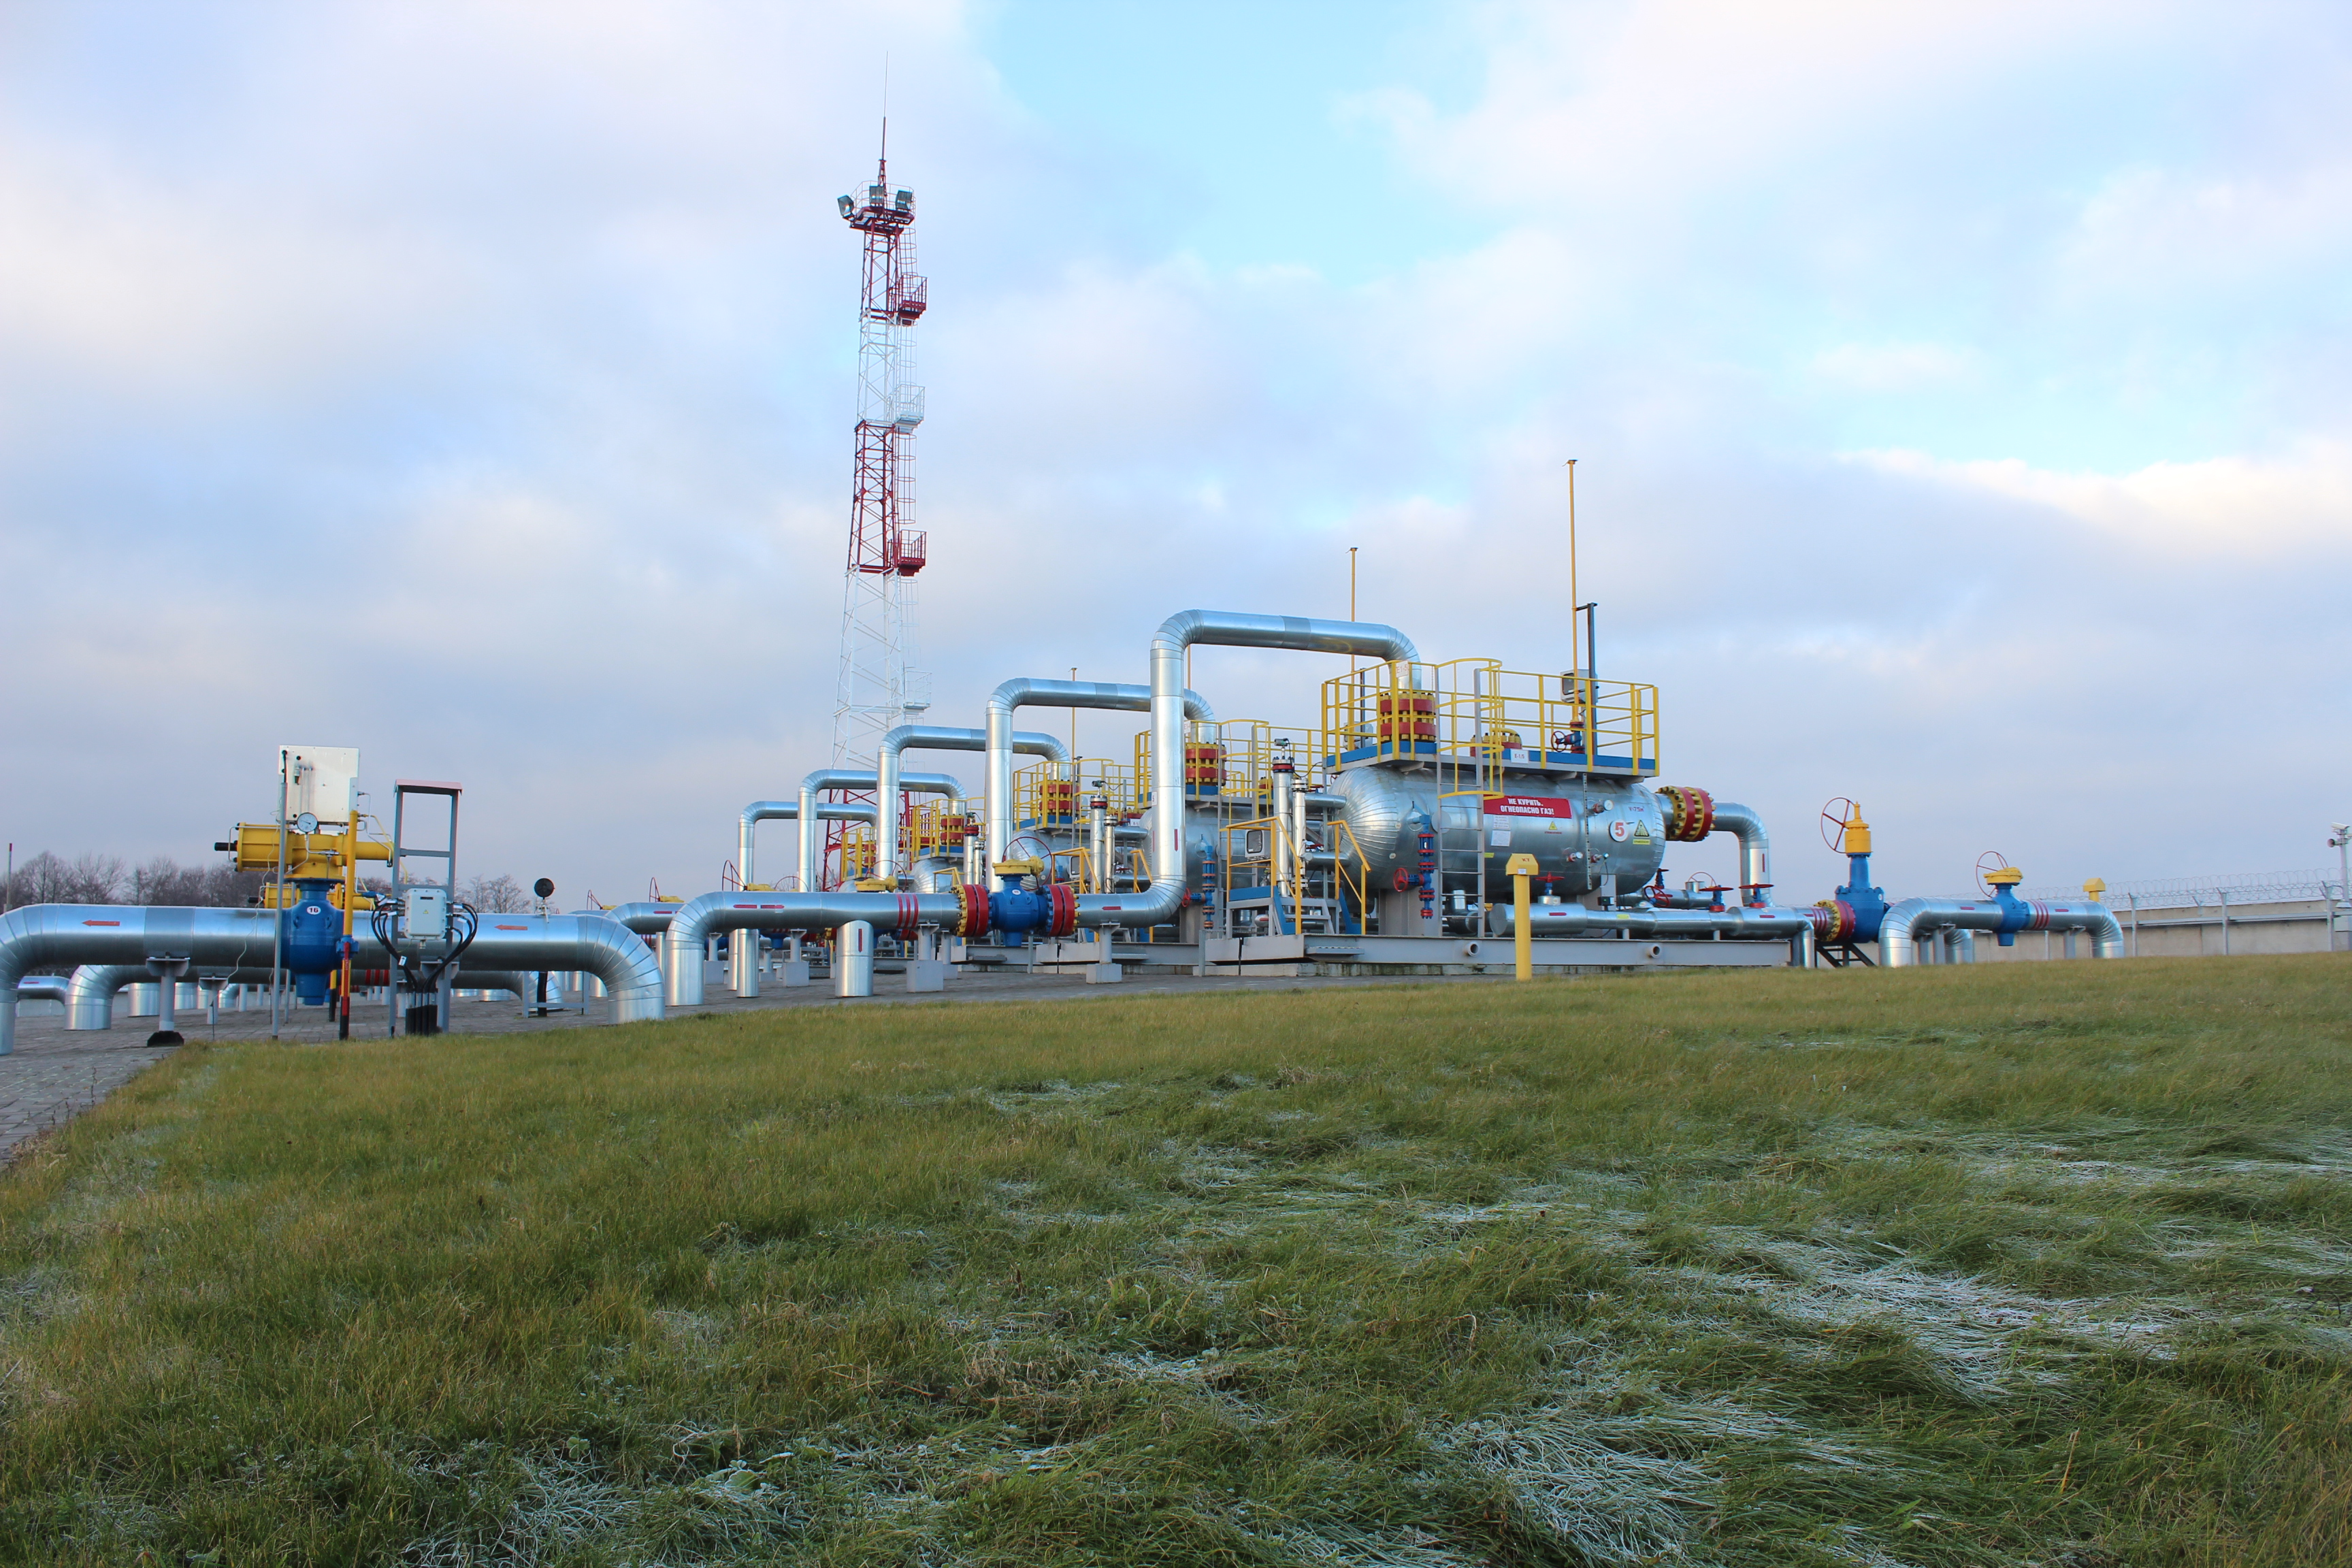 UGS facilities in Russia reach record potential daily deliverability of 843.3 million cubic meters